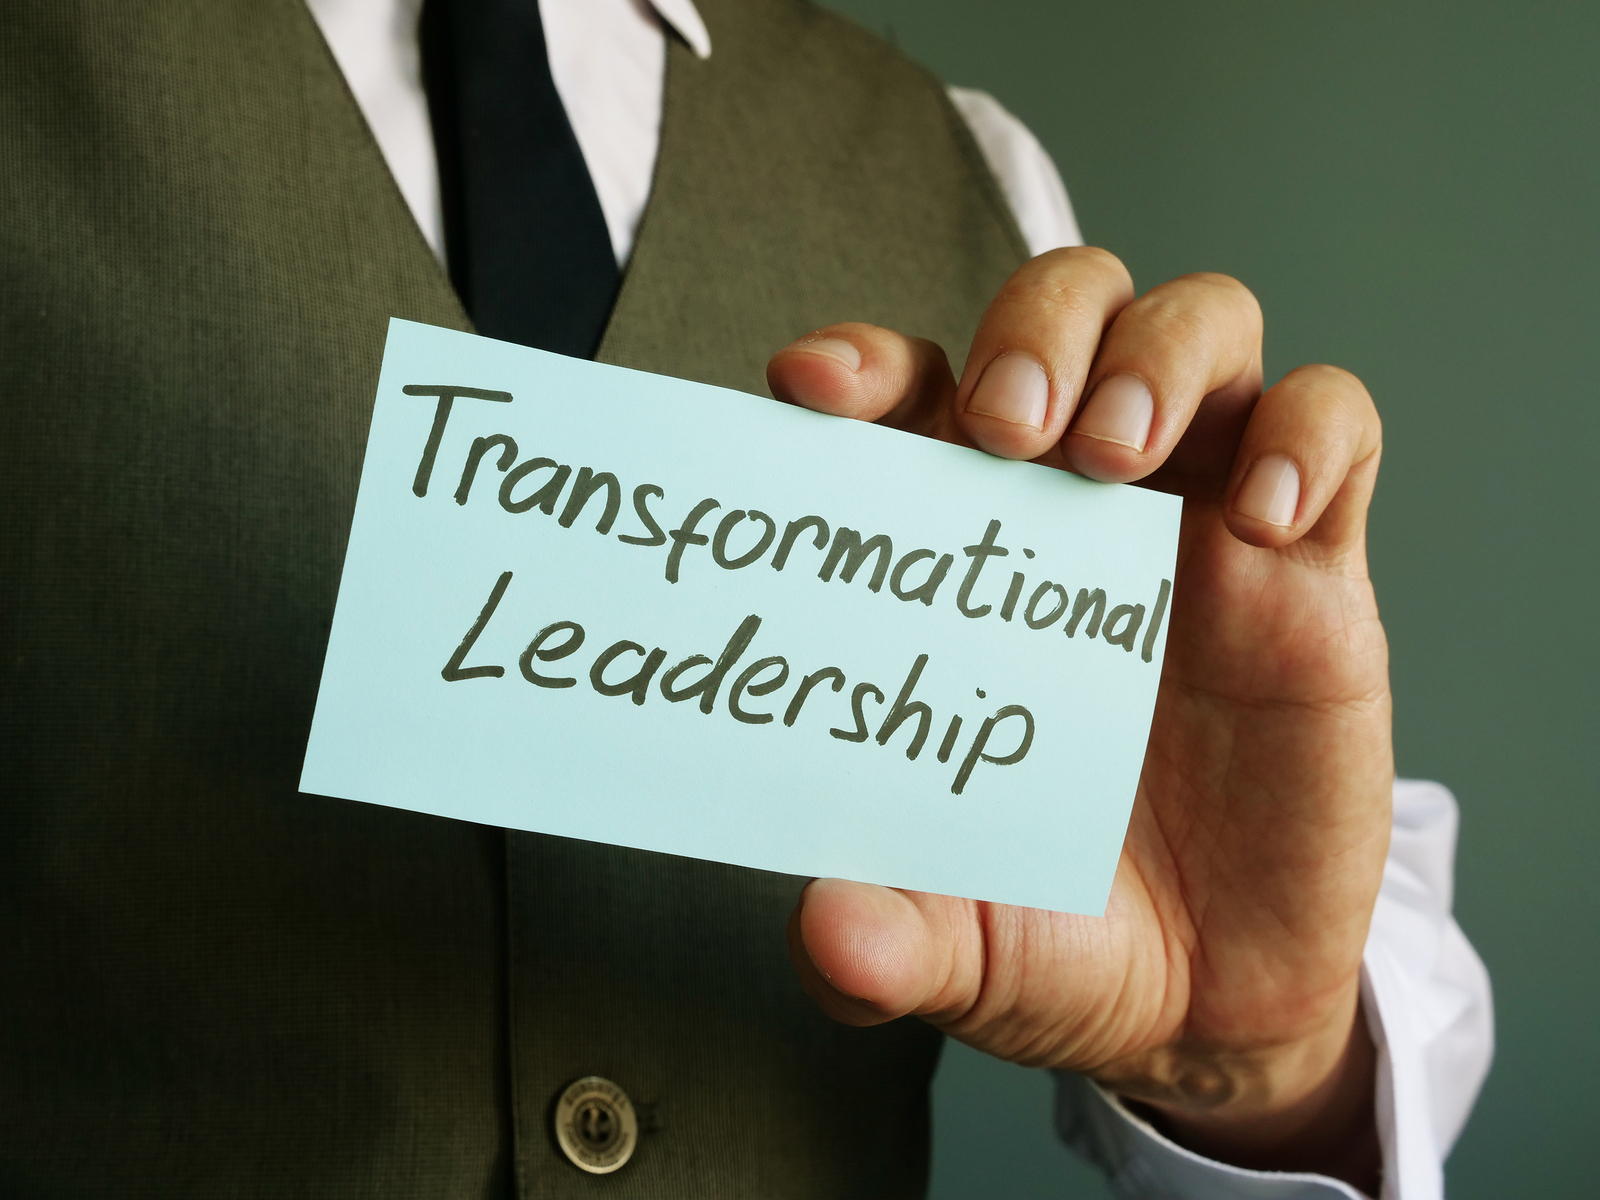 Transforming Managers into leaders through Transformational Leadership